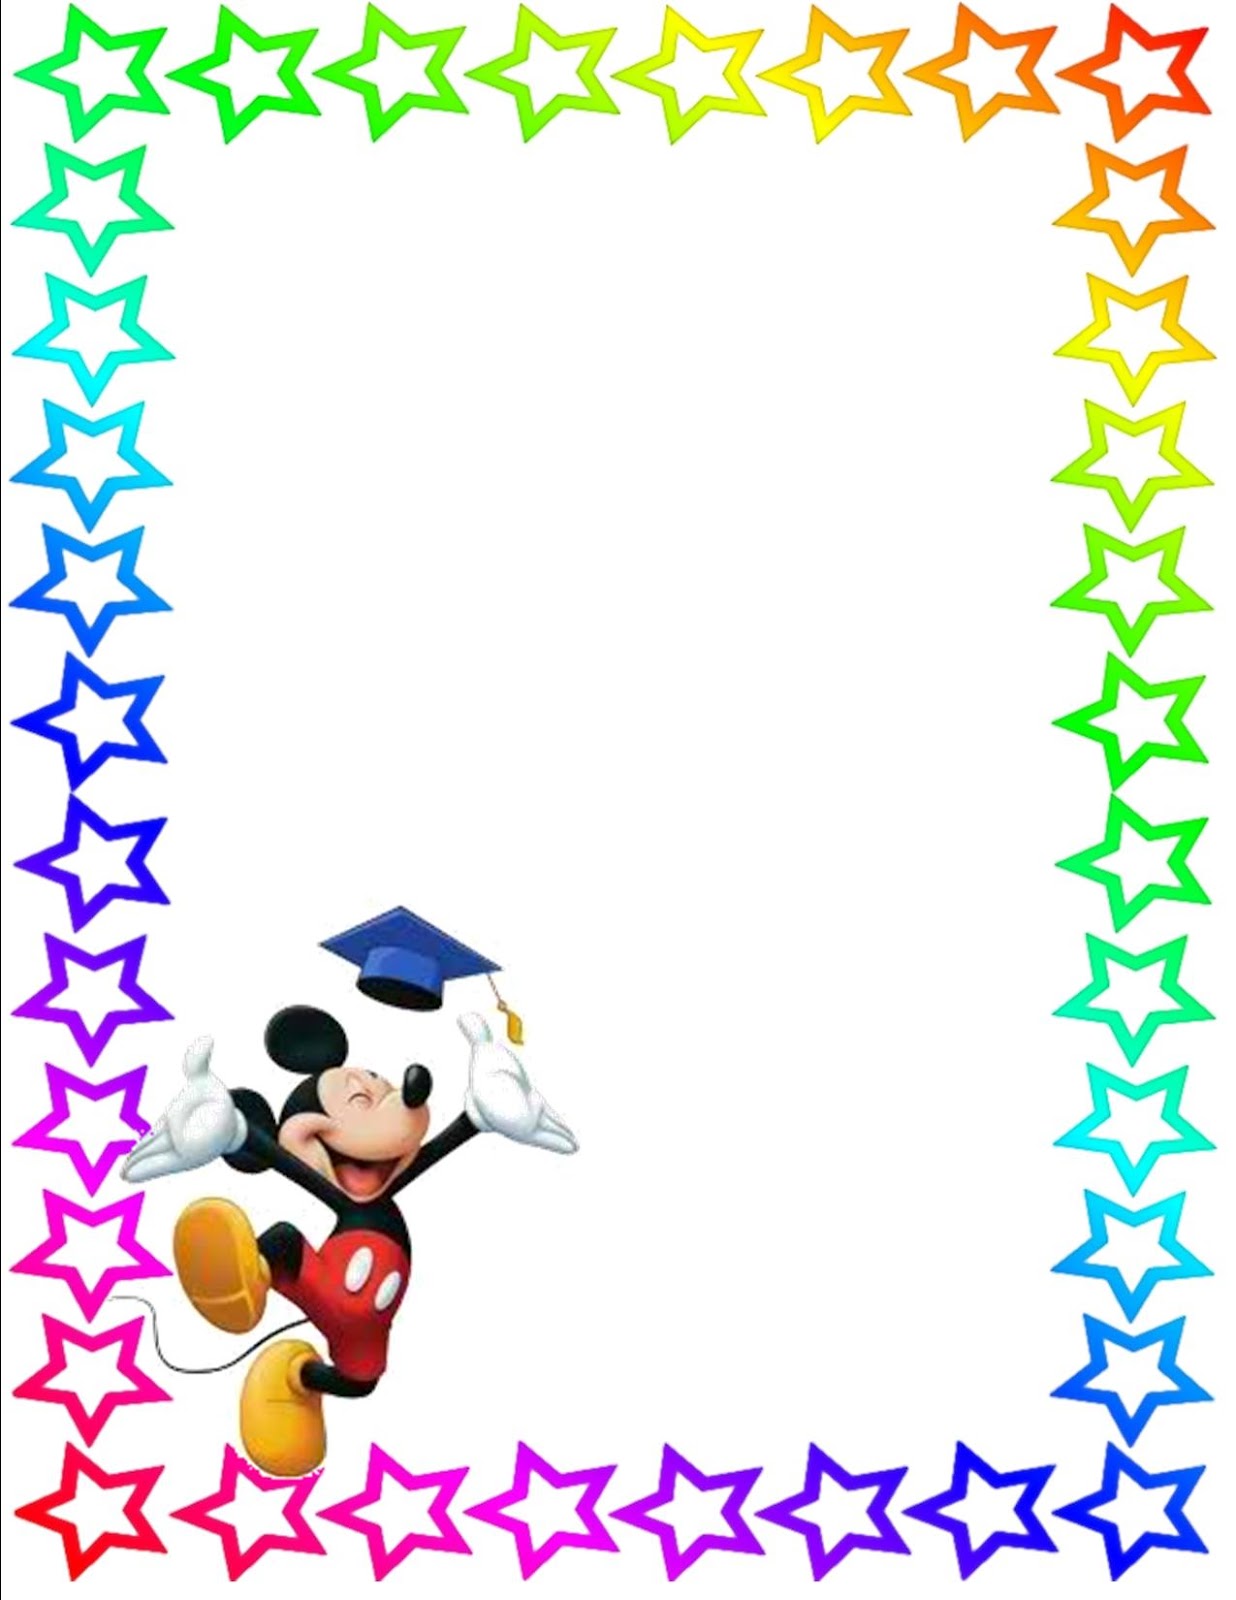 Star Page Border - ClipArt Best